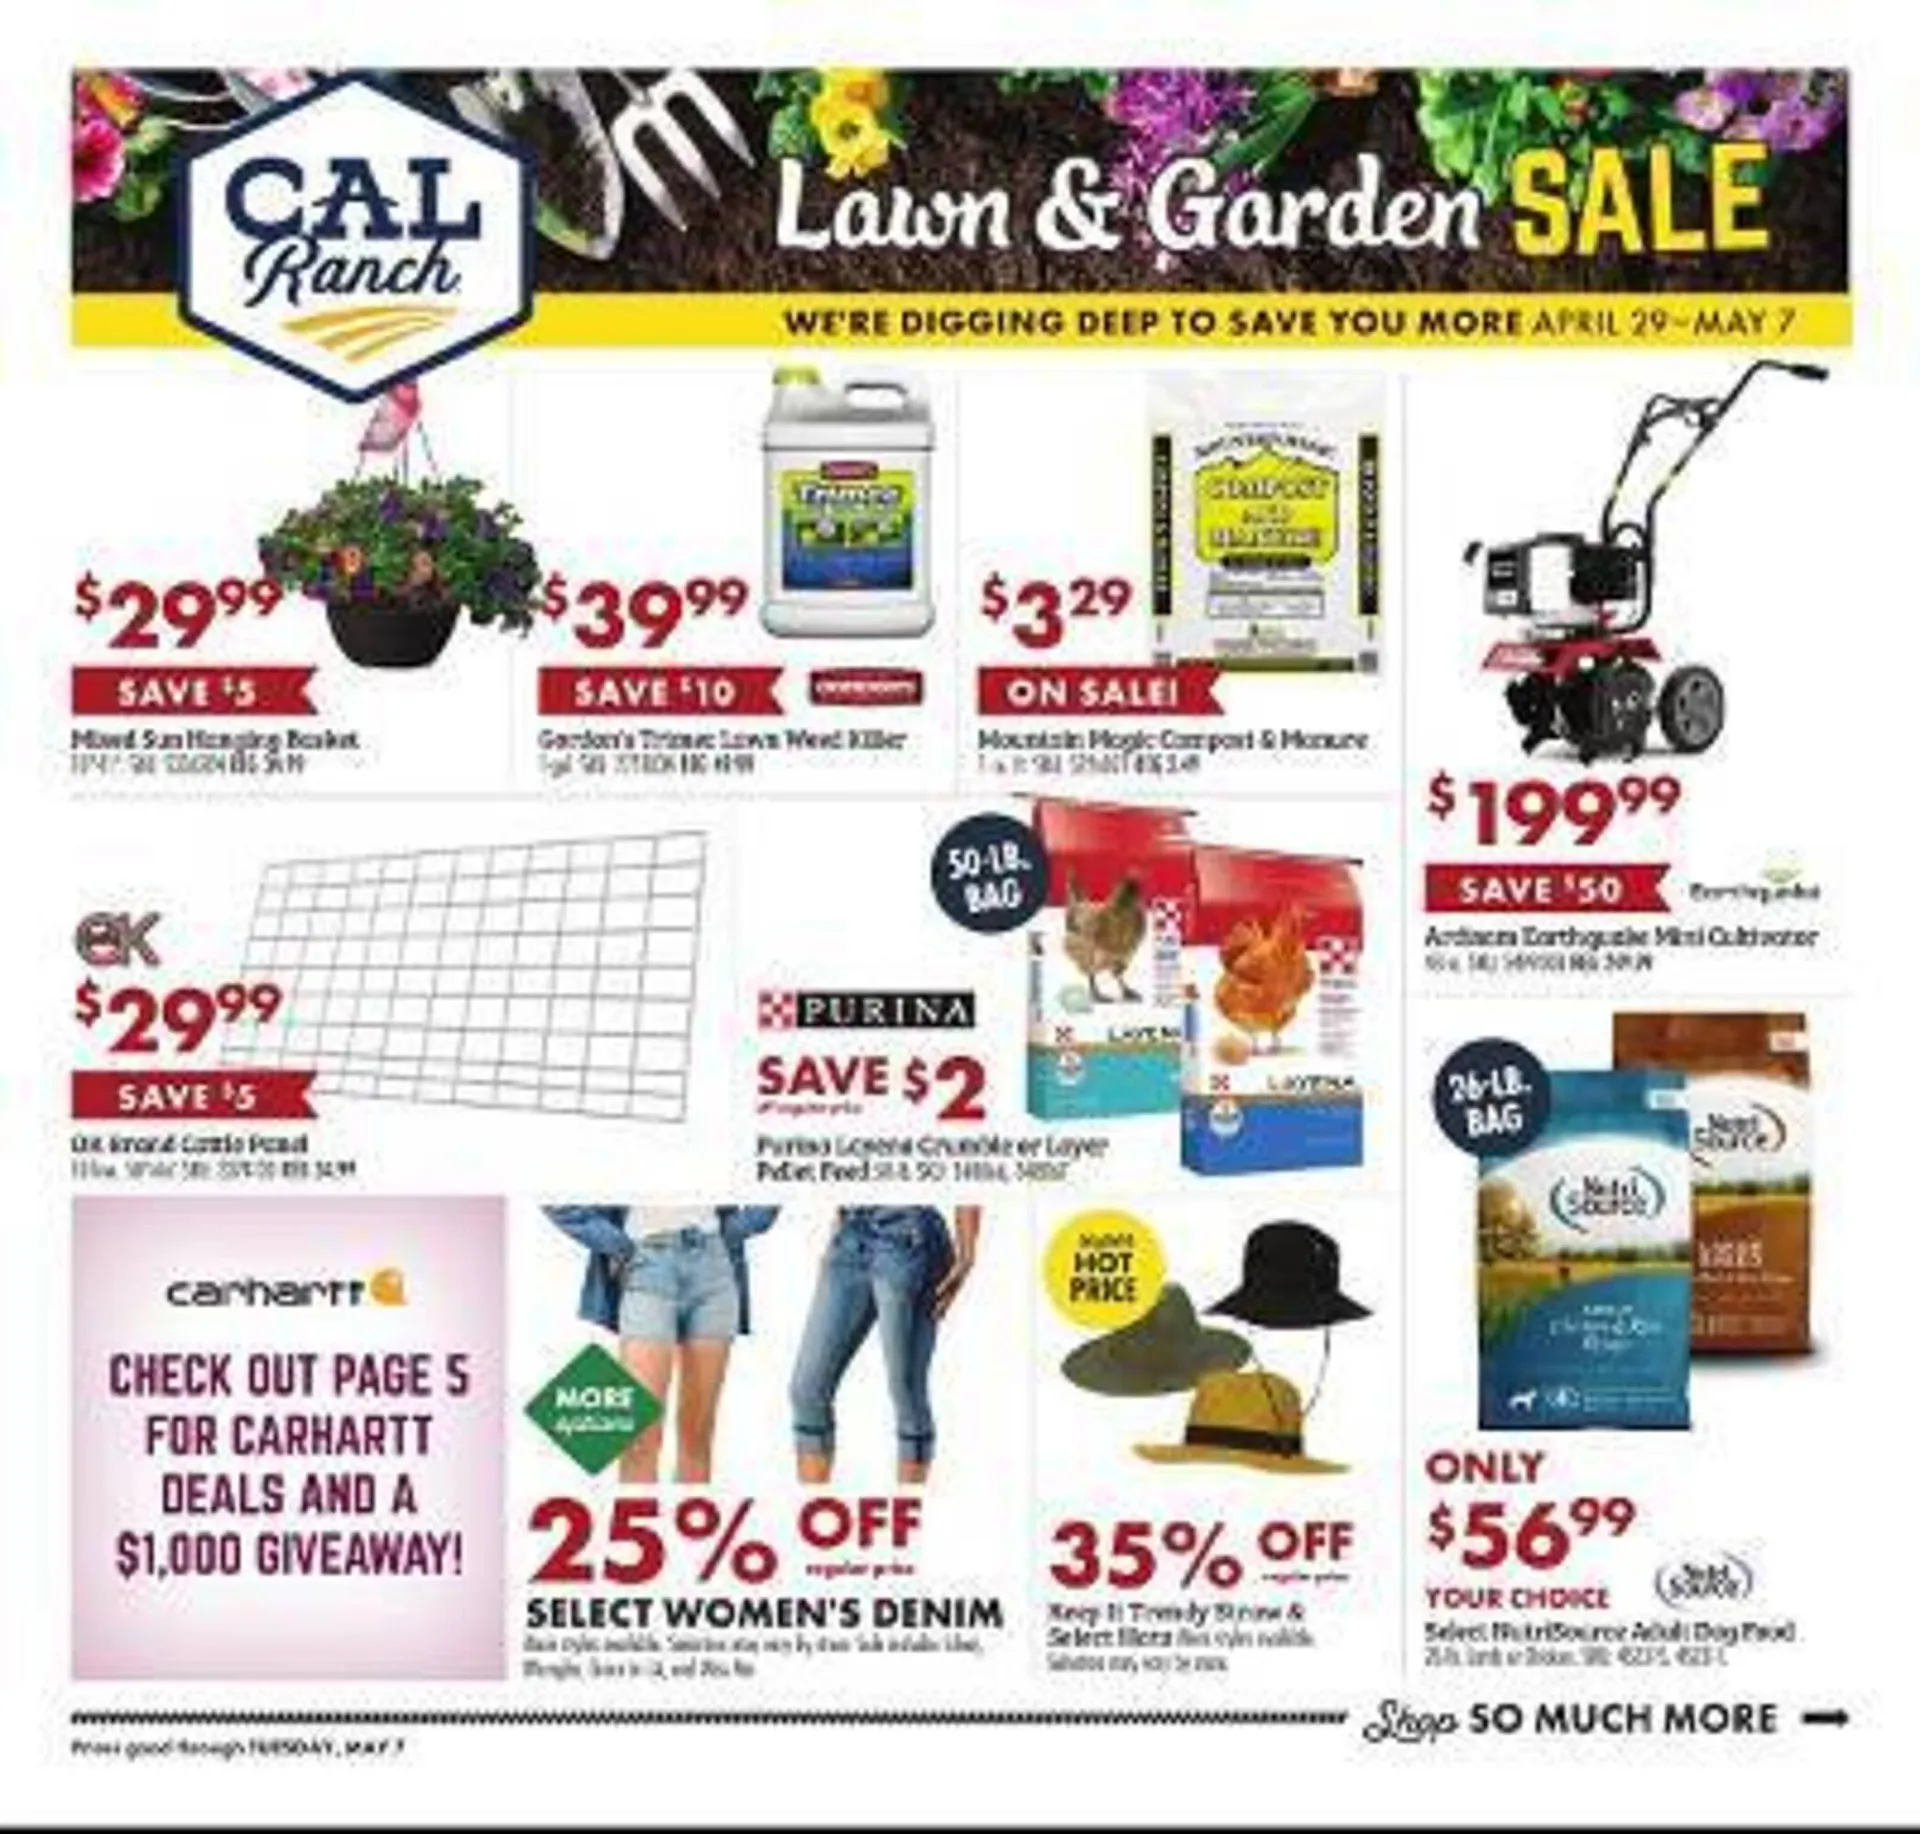 C A L Ranch Stores Weekly Ad - 1